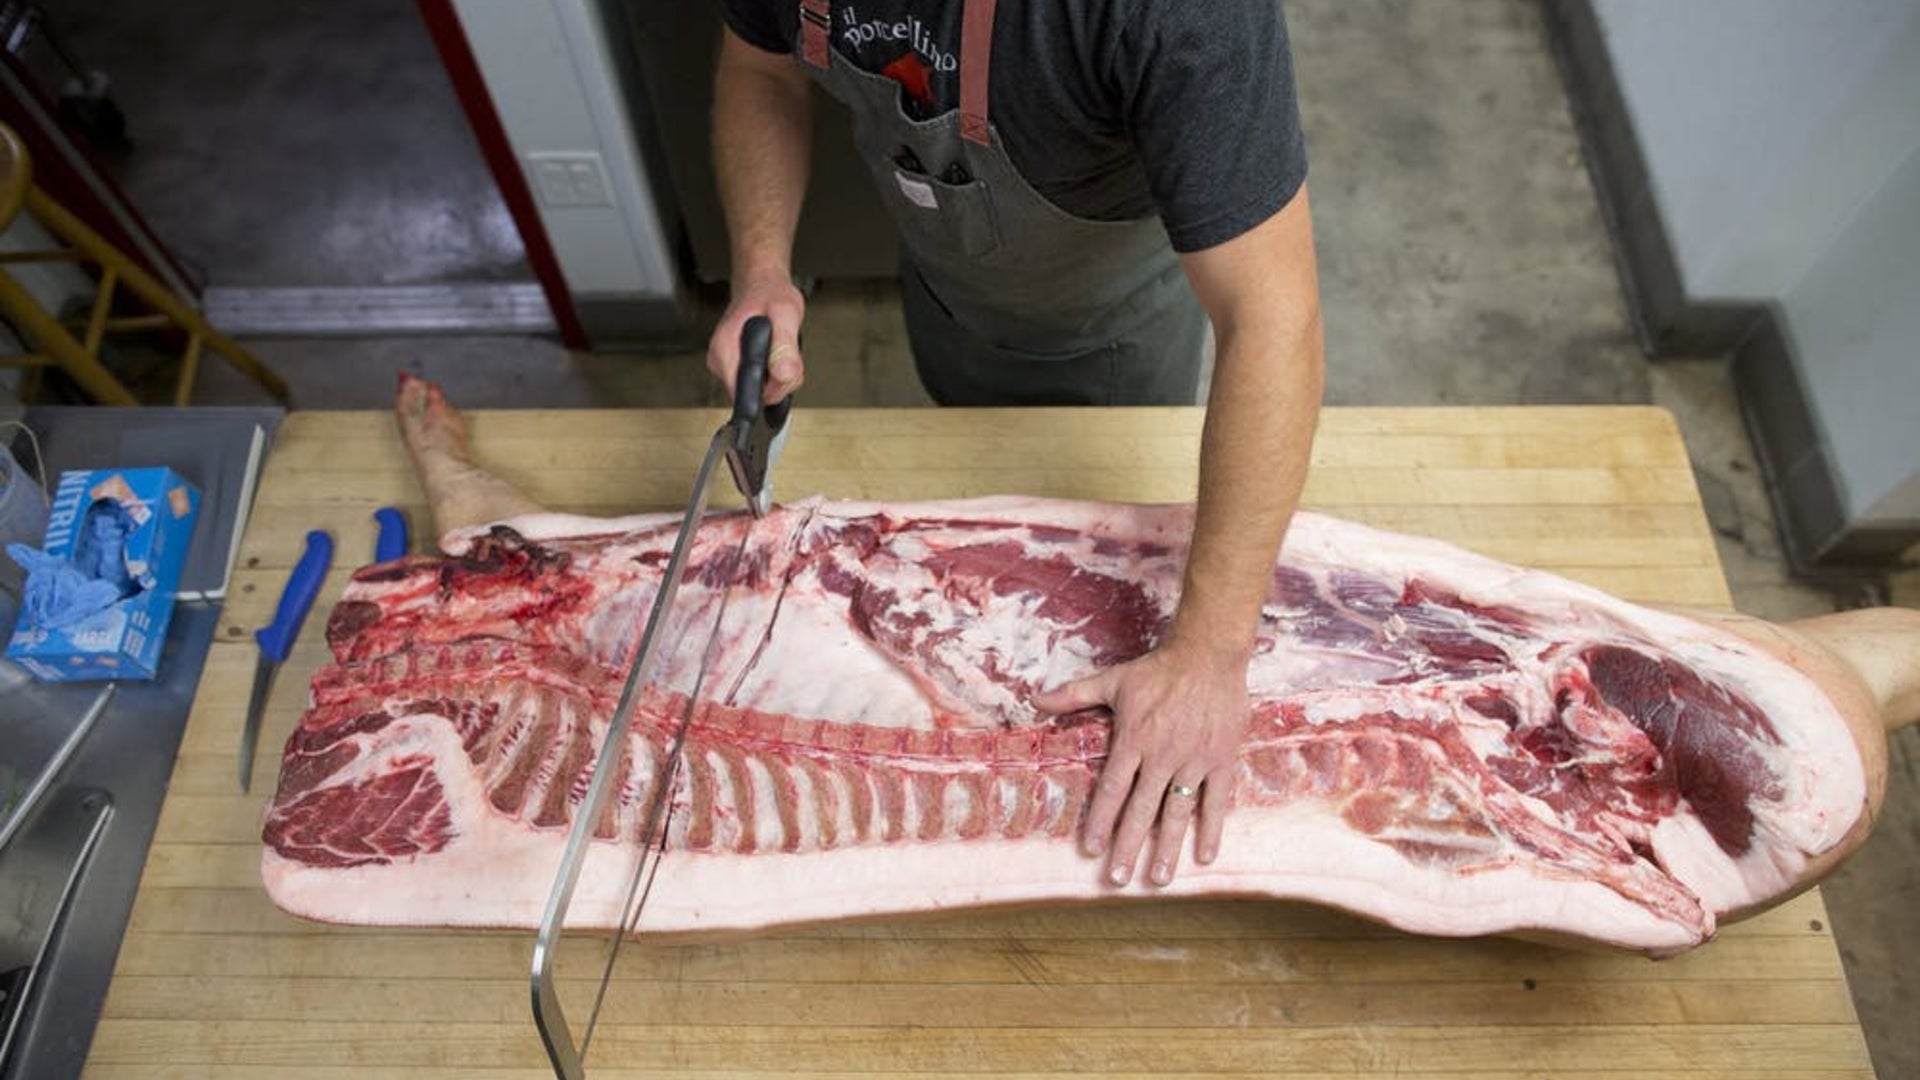 A picture shot from above looking down at a person using a saw to butcher the mid section of half a pig on a butcher table.